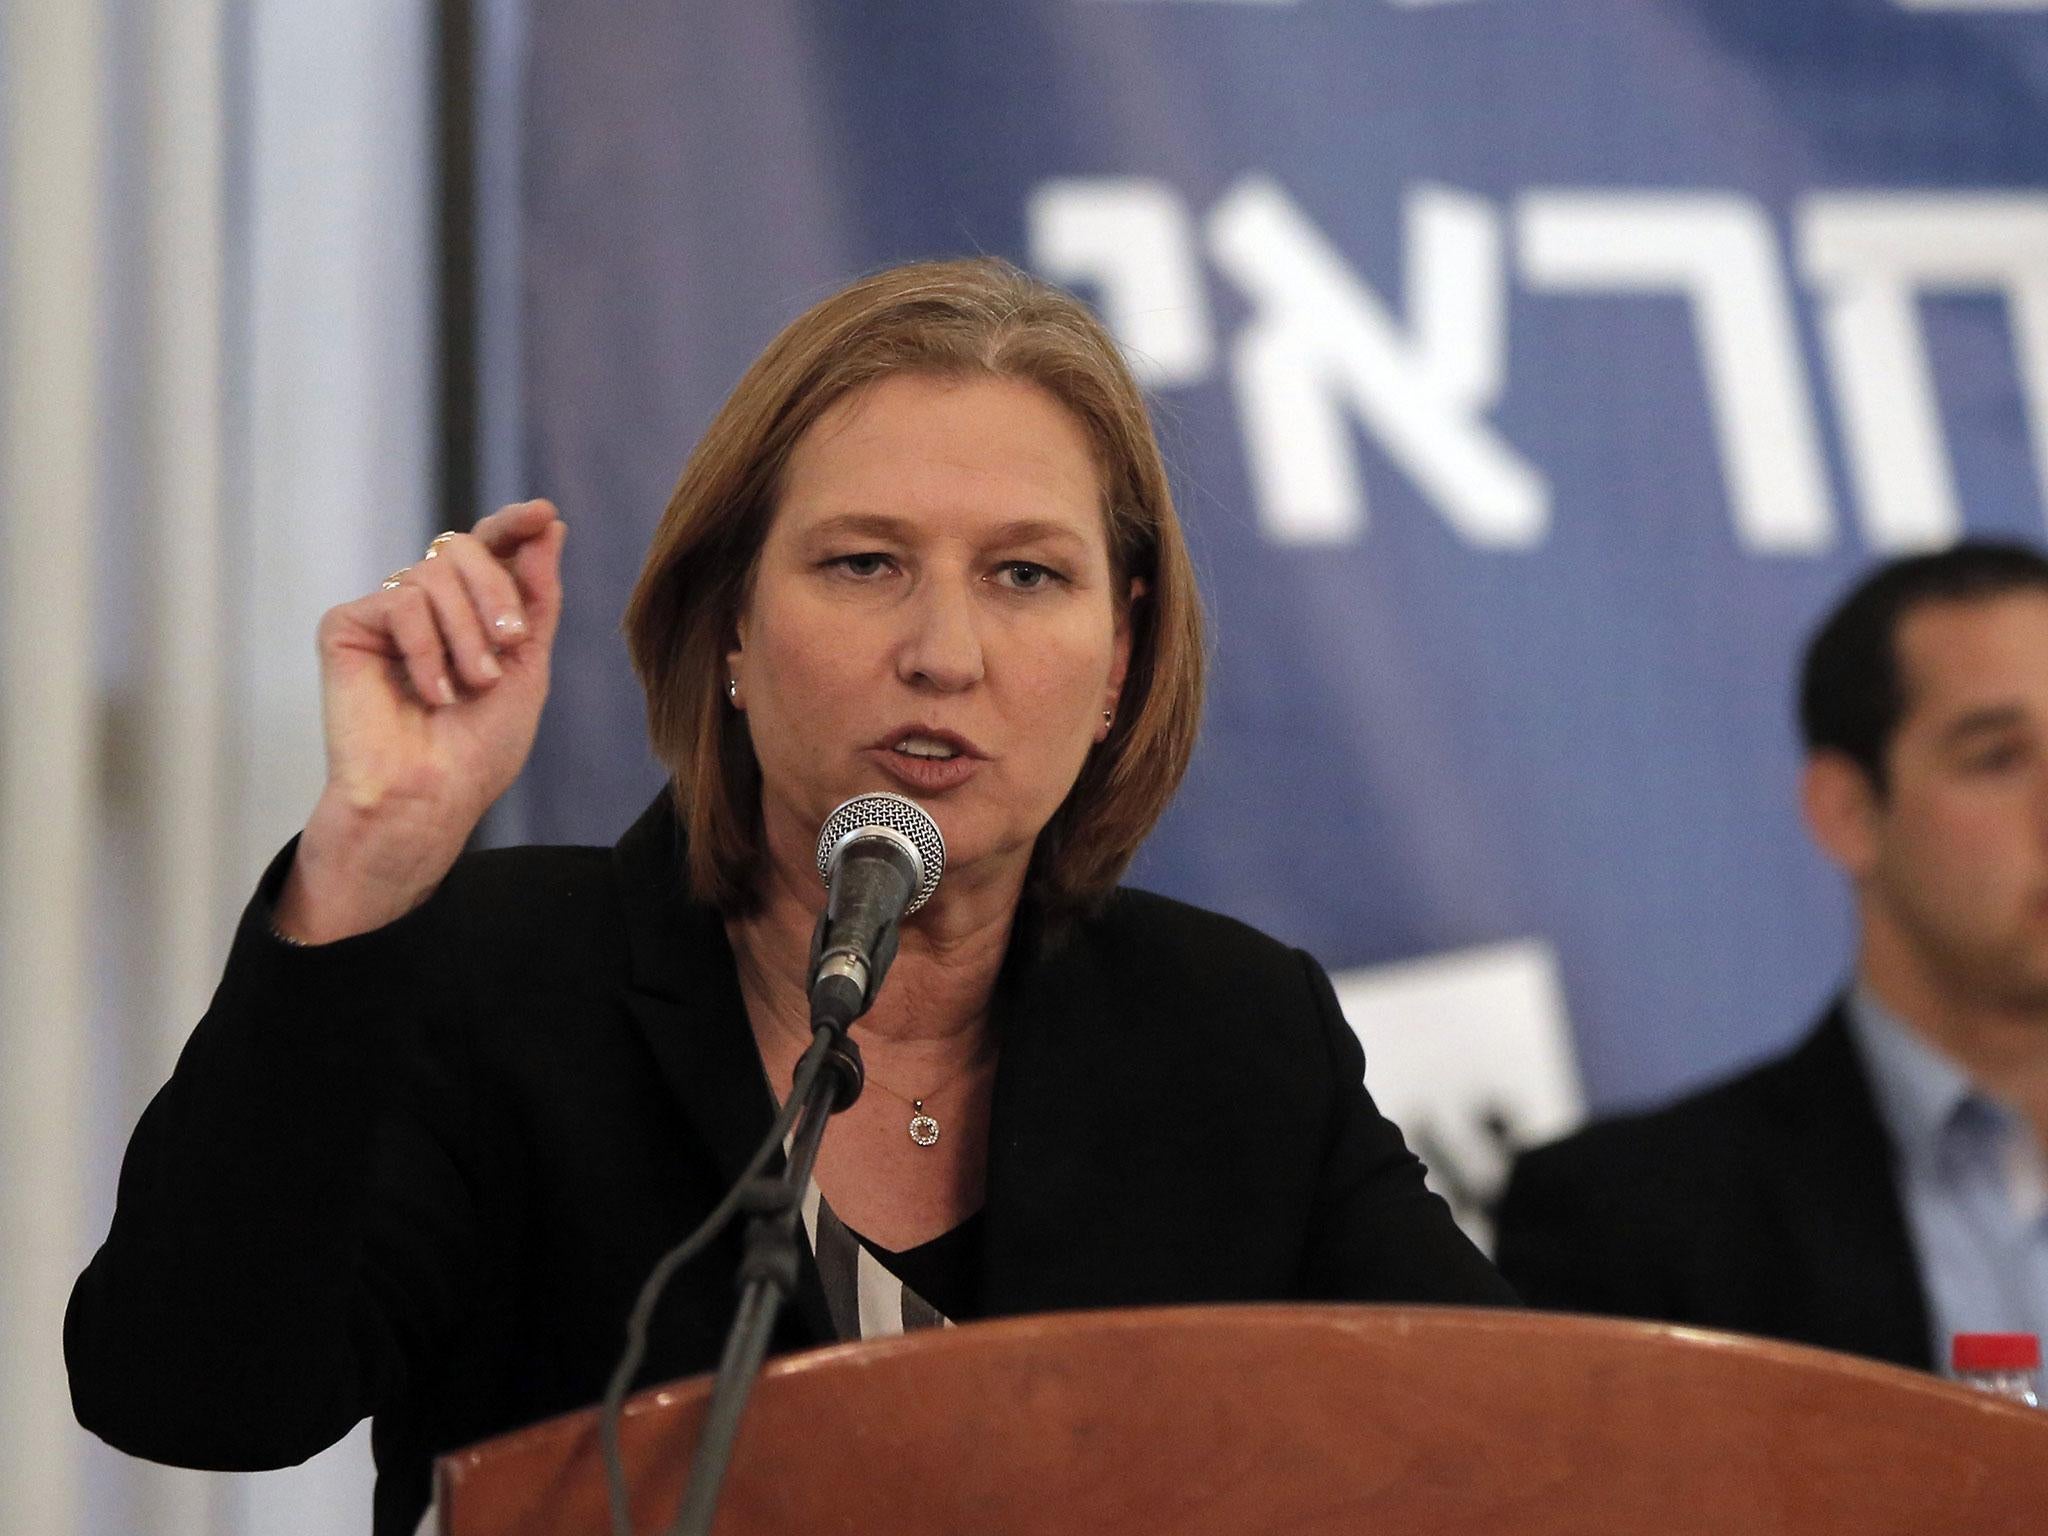 Tzipi Livni, Israel's former foreign minister, was granted diplomatic immunity and agreed to meet with the minister in charge of Middle Eastern affairs after the summons was cancelled